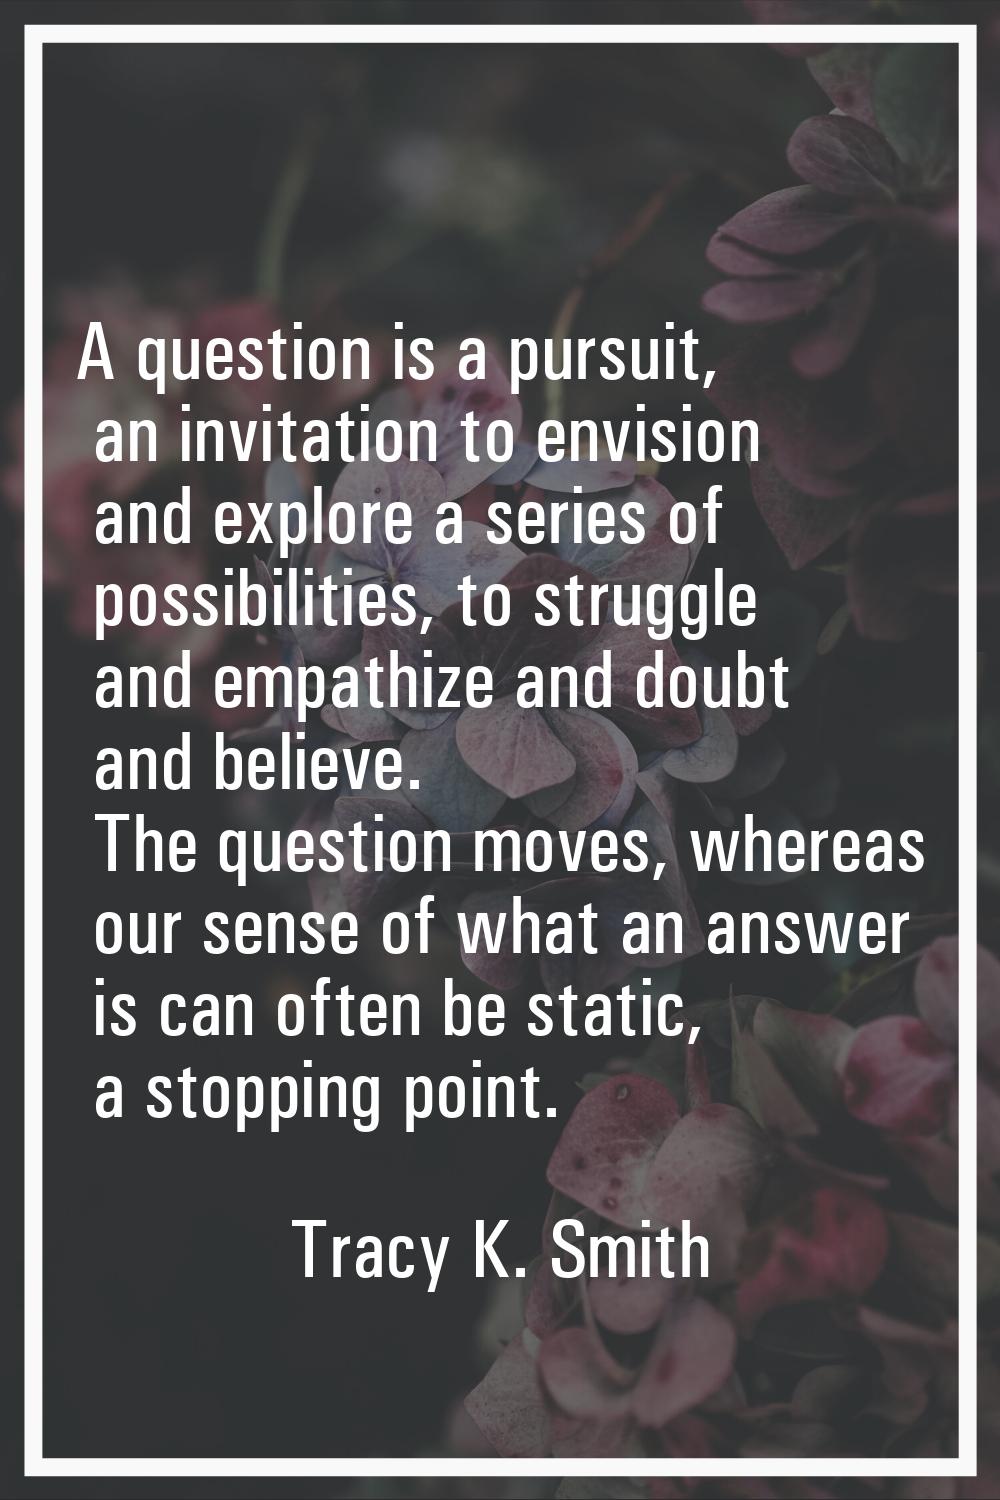 A question is a pursuit, an invitation to envision and explore a series of possibilities, to strugg